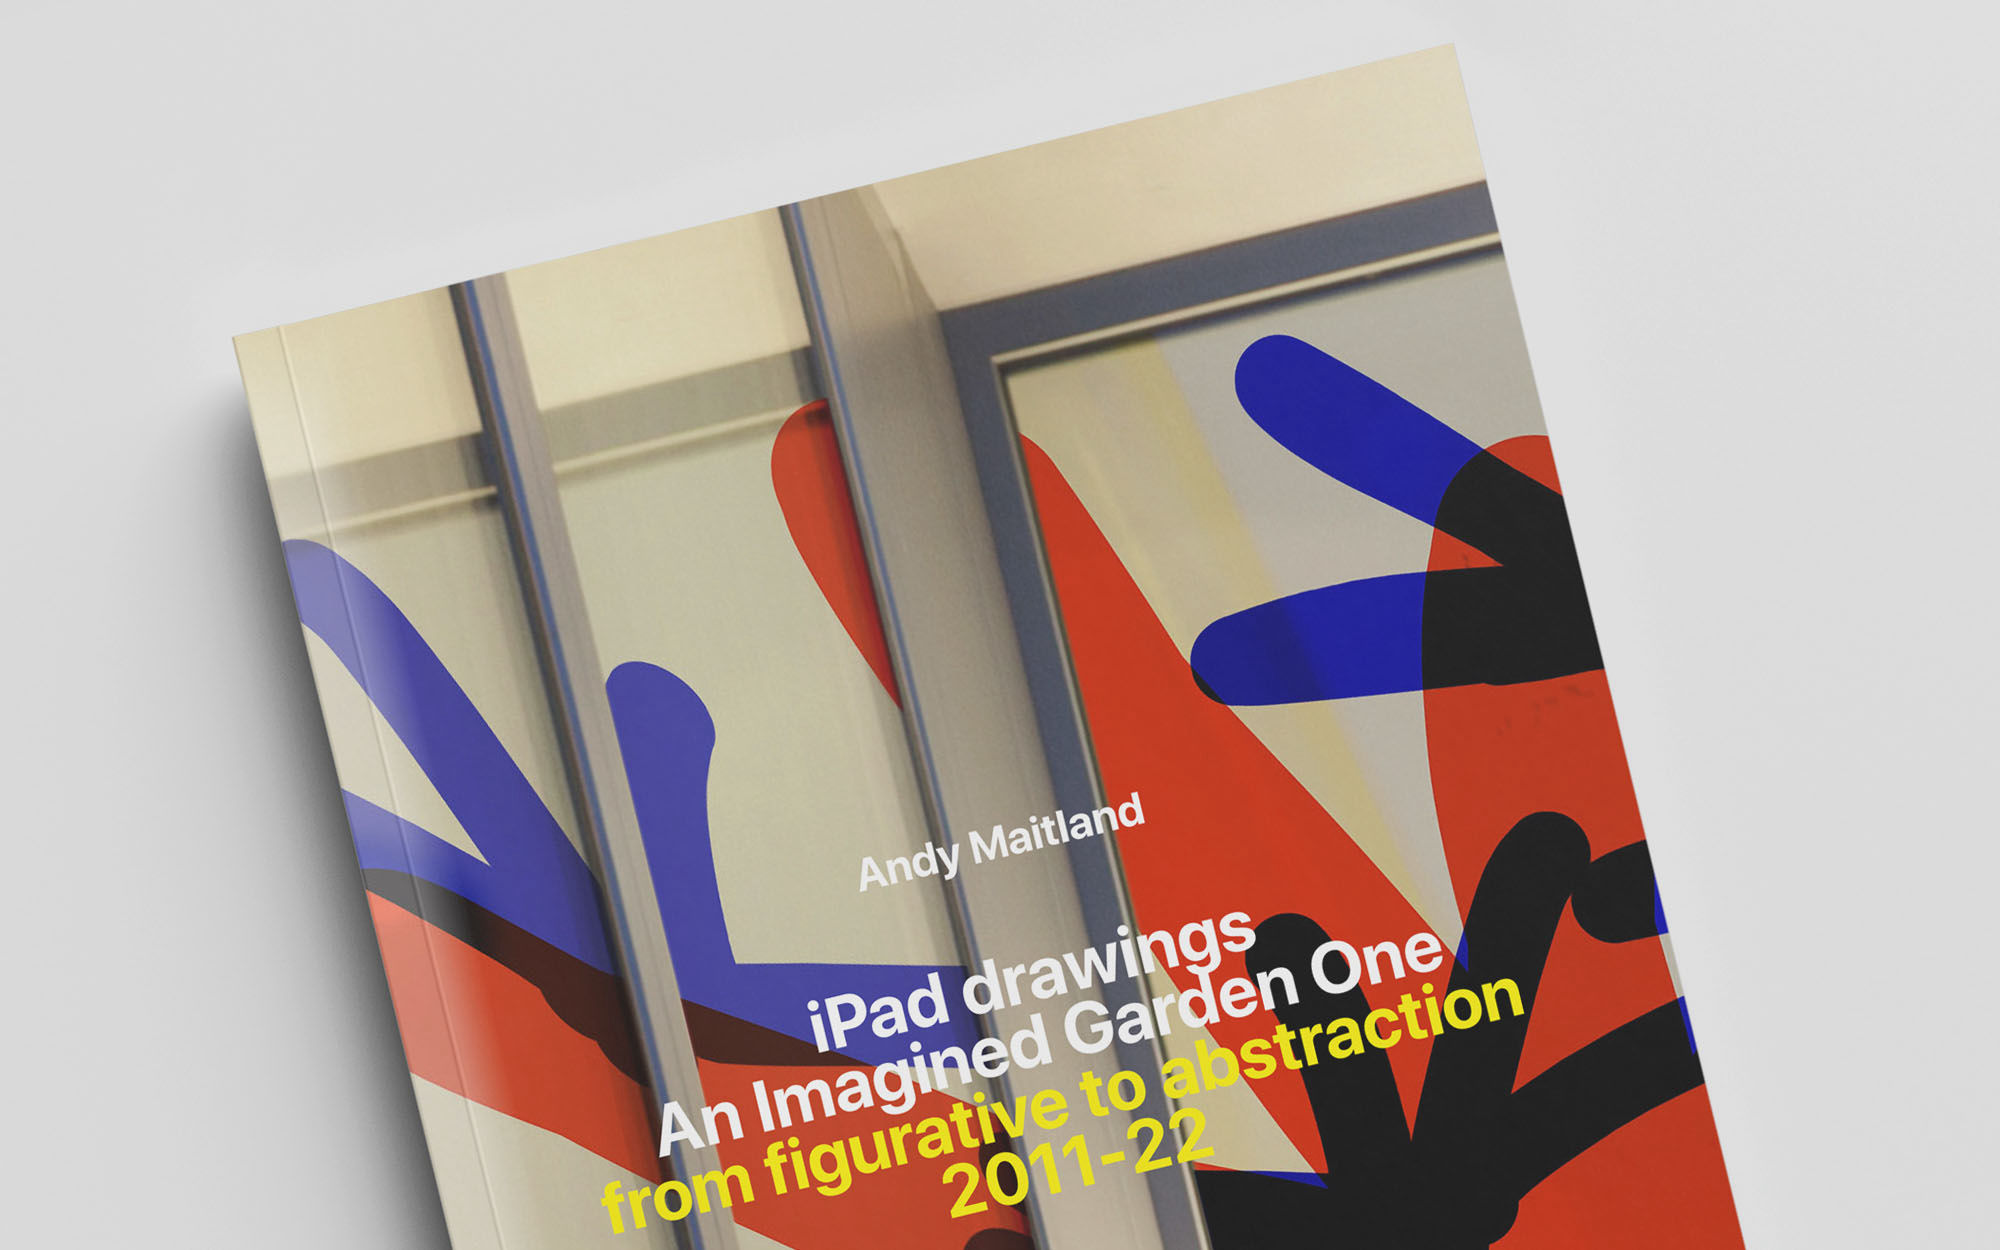 2023 - A new publication 'An Imagined Garden One, iPad drawings, from figurative to abstraction 2011-22'.